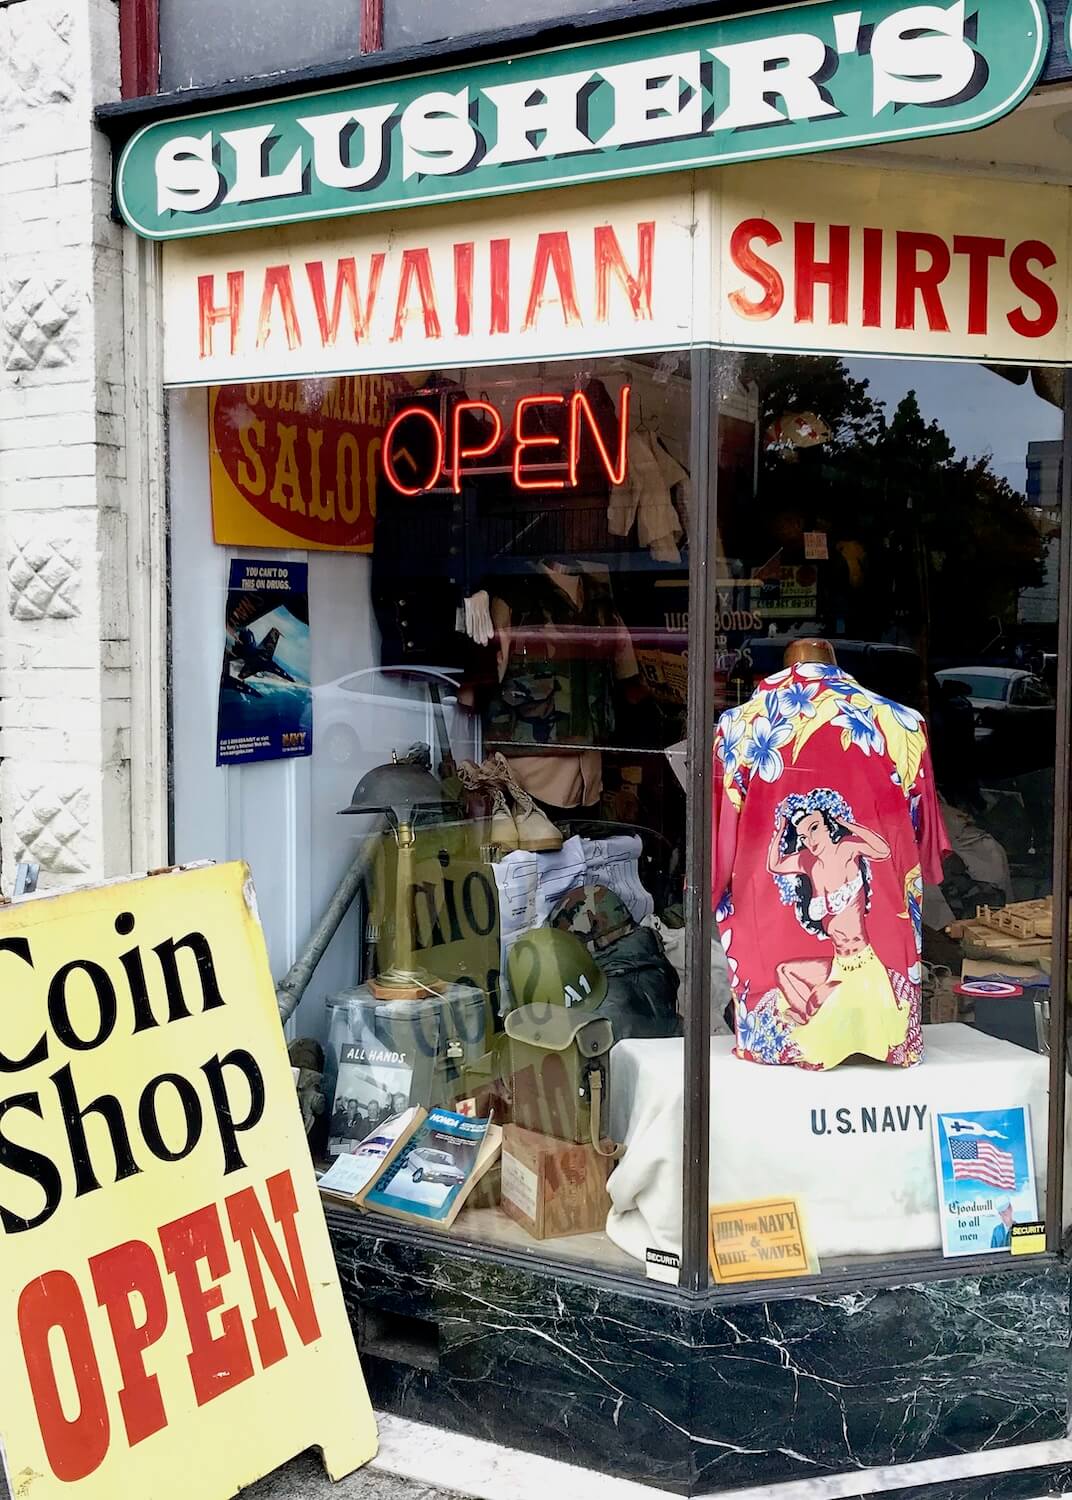 Looking through a window of an antique store in Central, Washignton which is along the Seattle to Portland drive. There is a sandwich board out front that's yellow with black and red lettering that says, "Coin Shop Open." The signage in the front window says, "Hawaiian Shirts" in red lettering. In the window there is a US Navy blanket and a Hawaiian shirt on display.